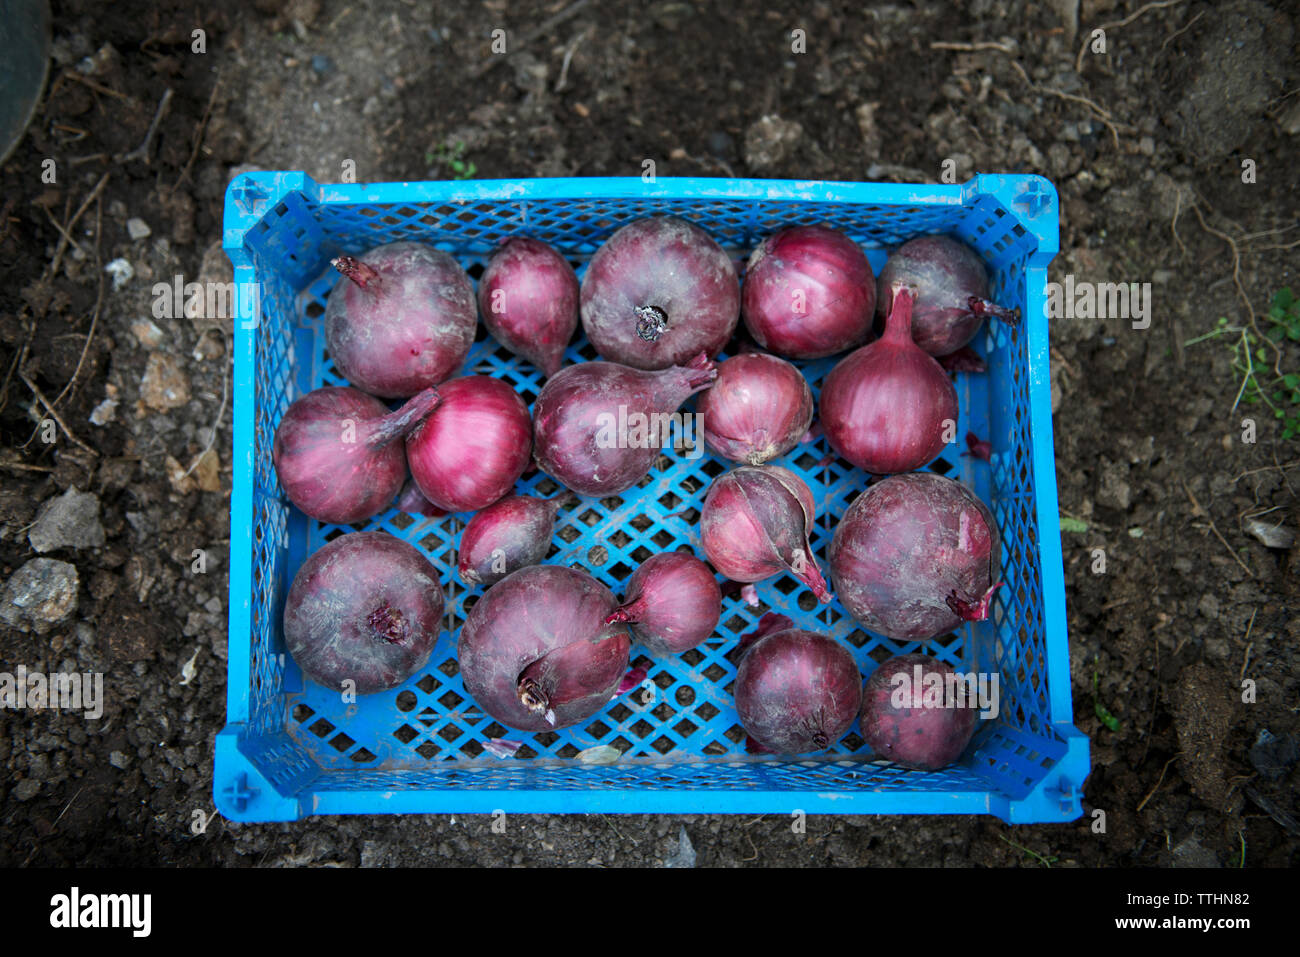 Overhead view of onions in plastic crate at organic farm Stock Photo